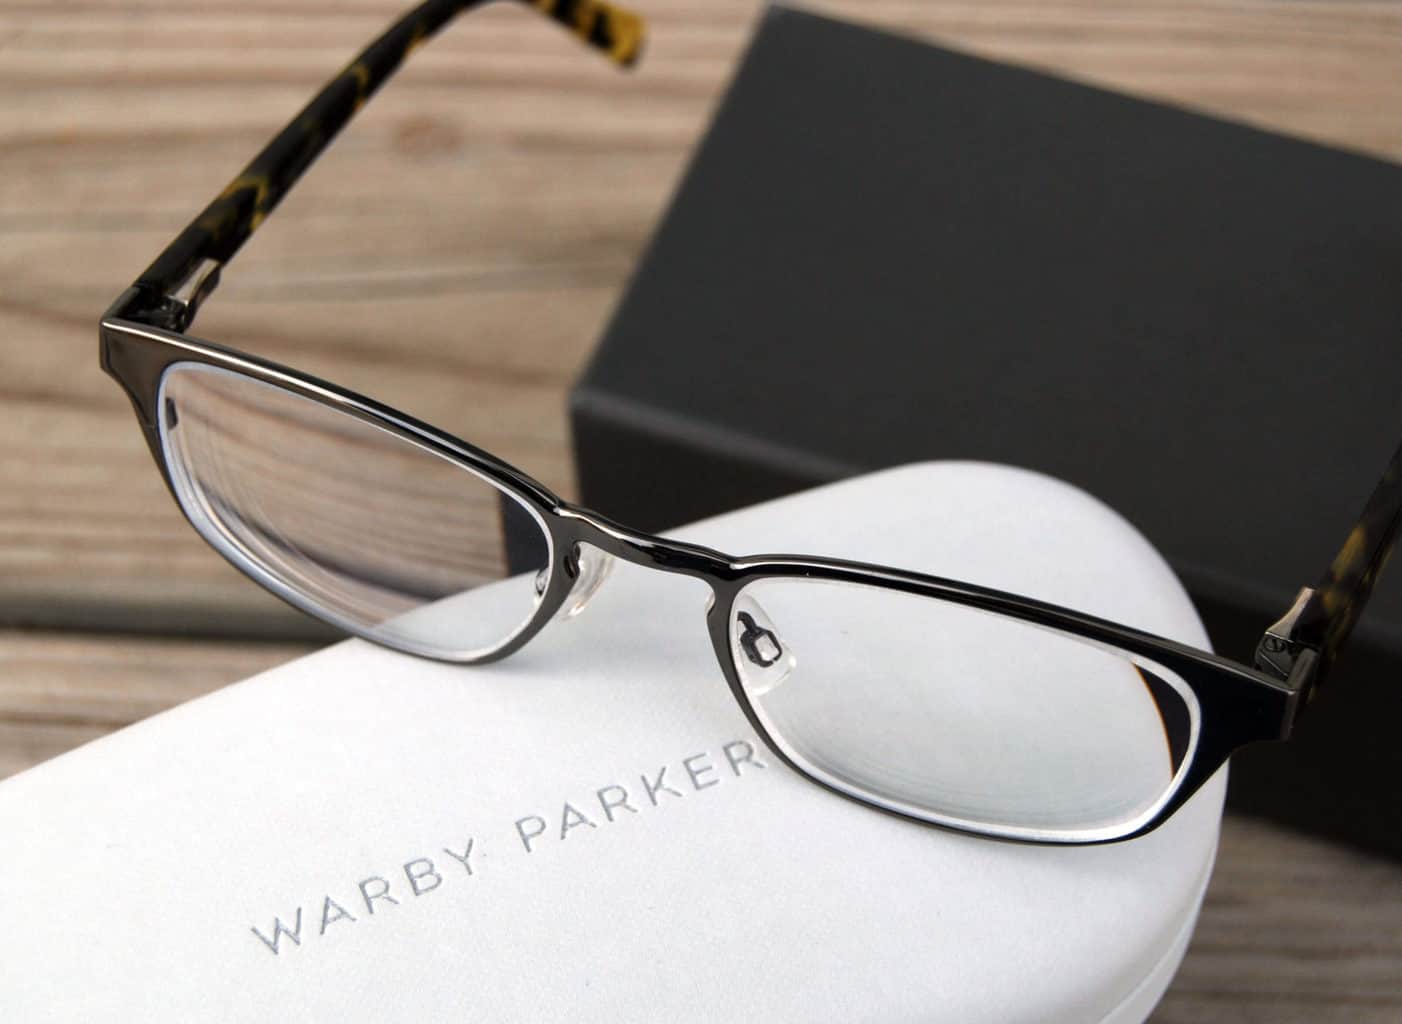 warby parker review